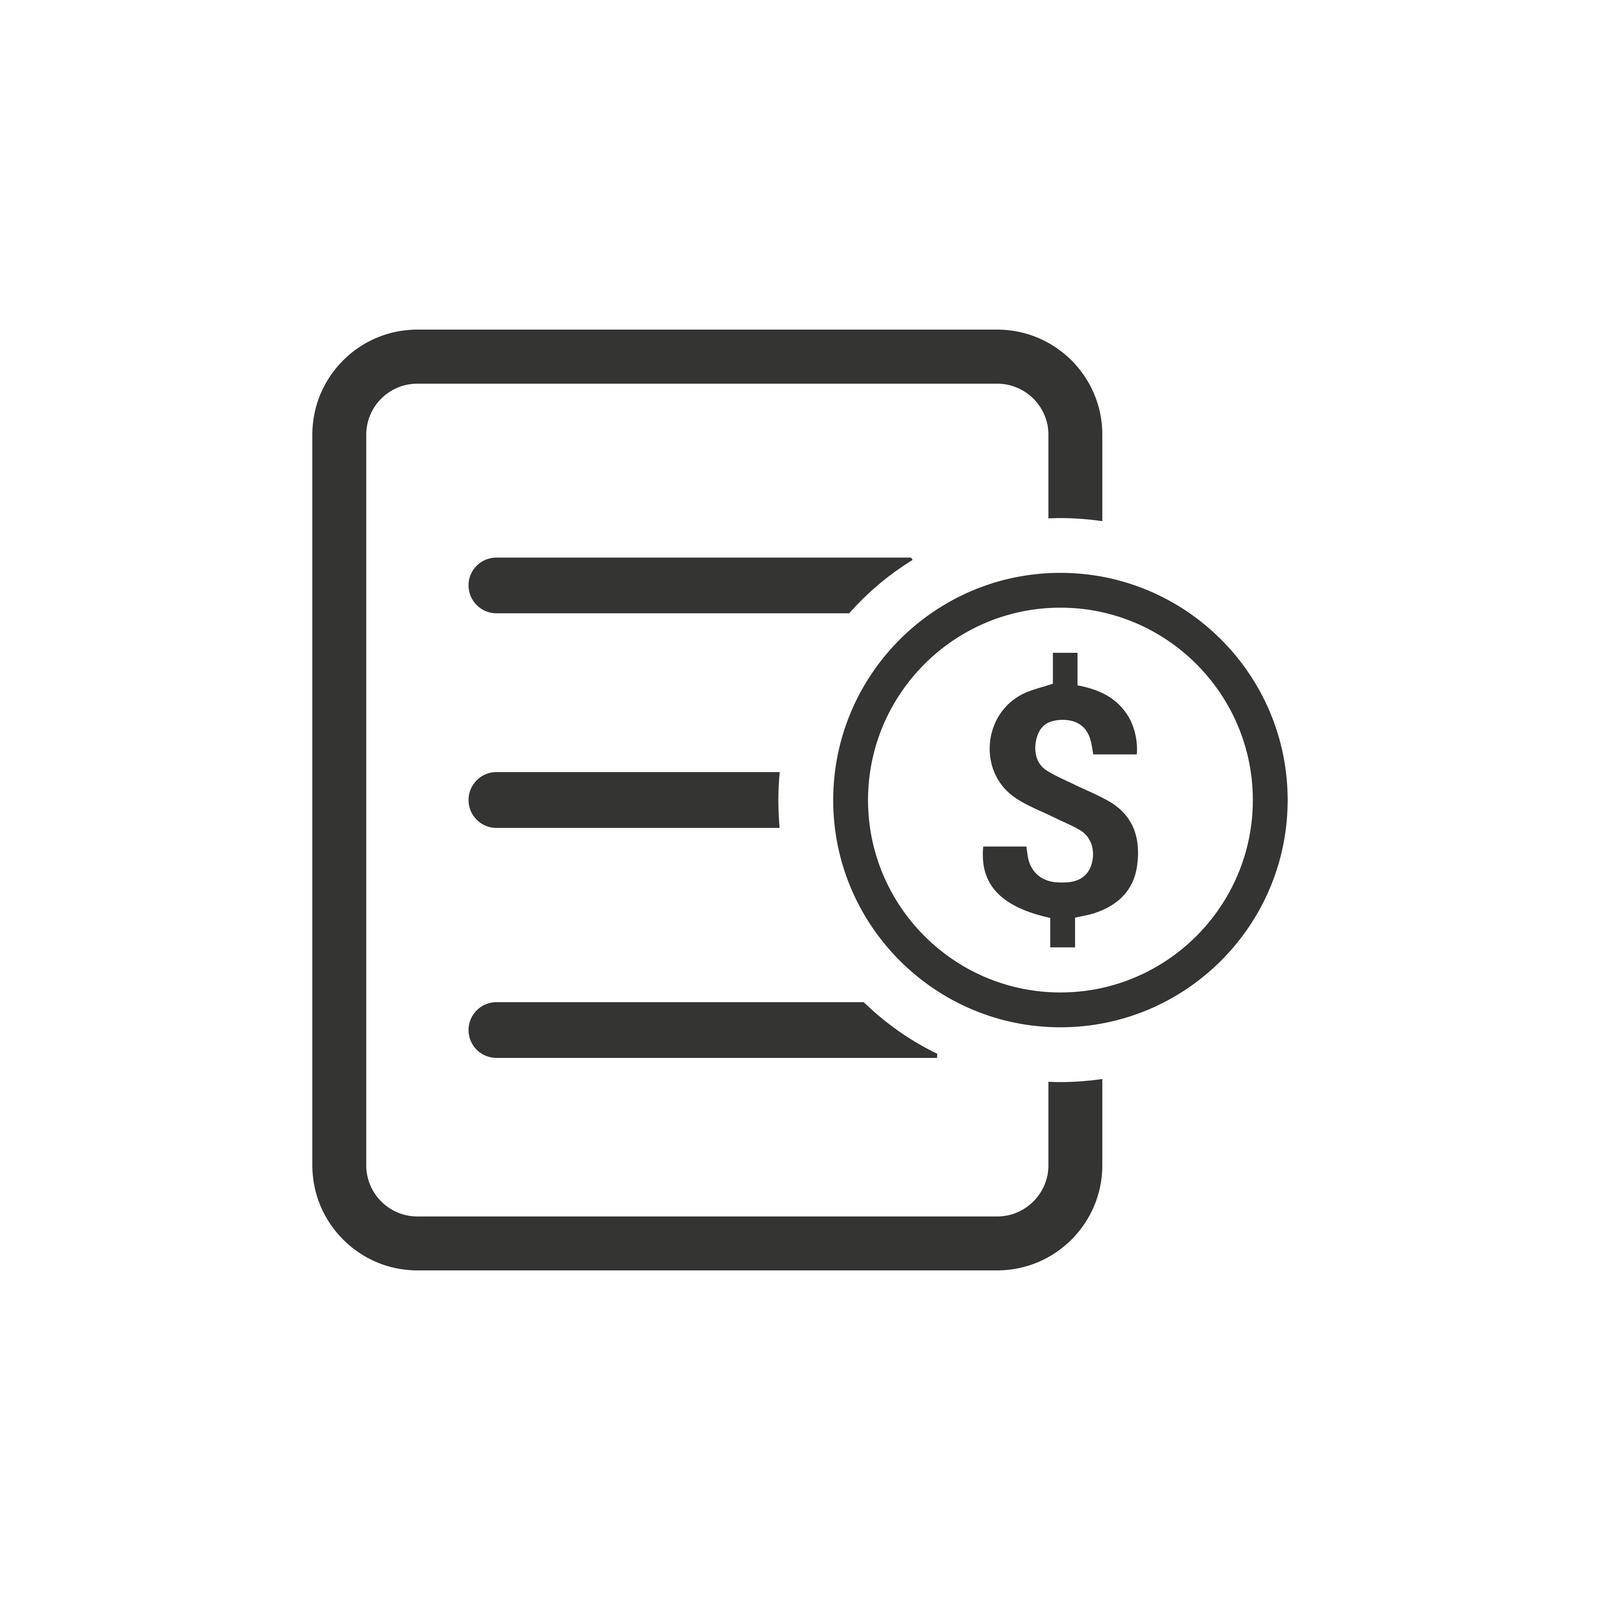 Financial Document icon. Vector EPS file.